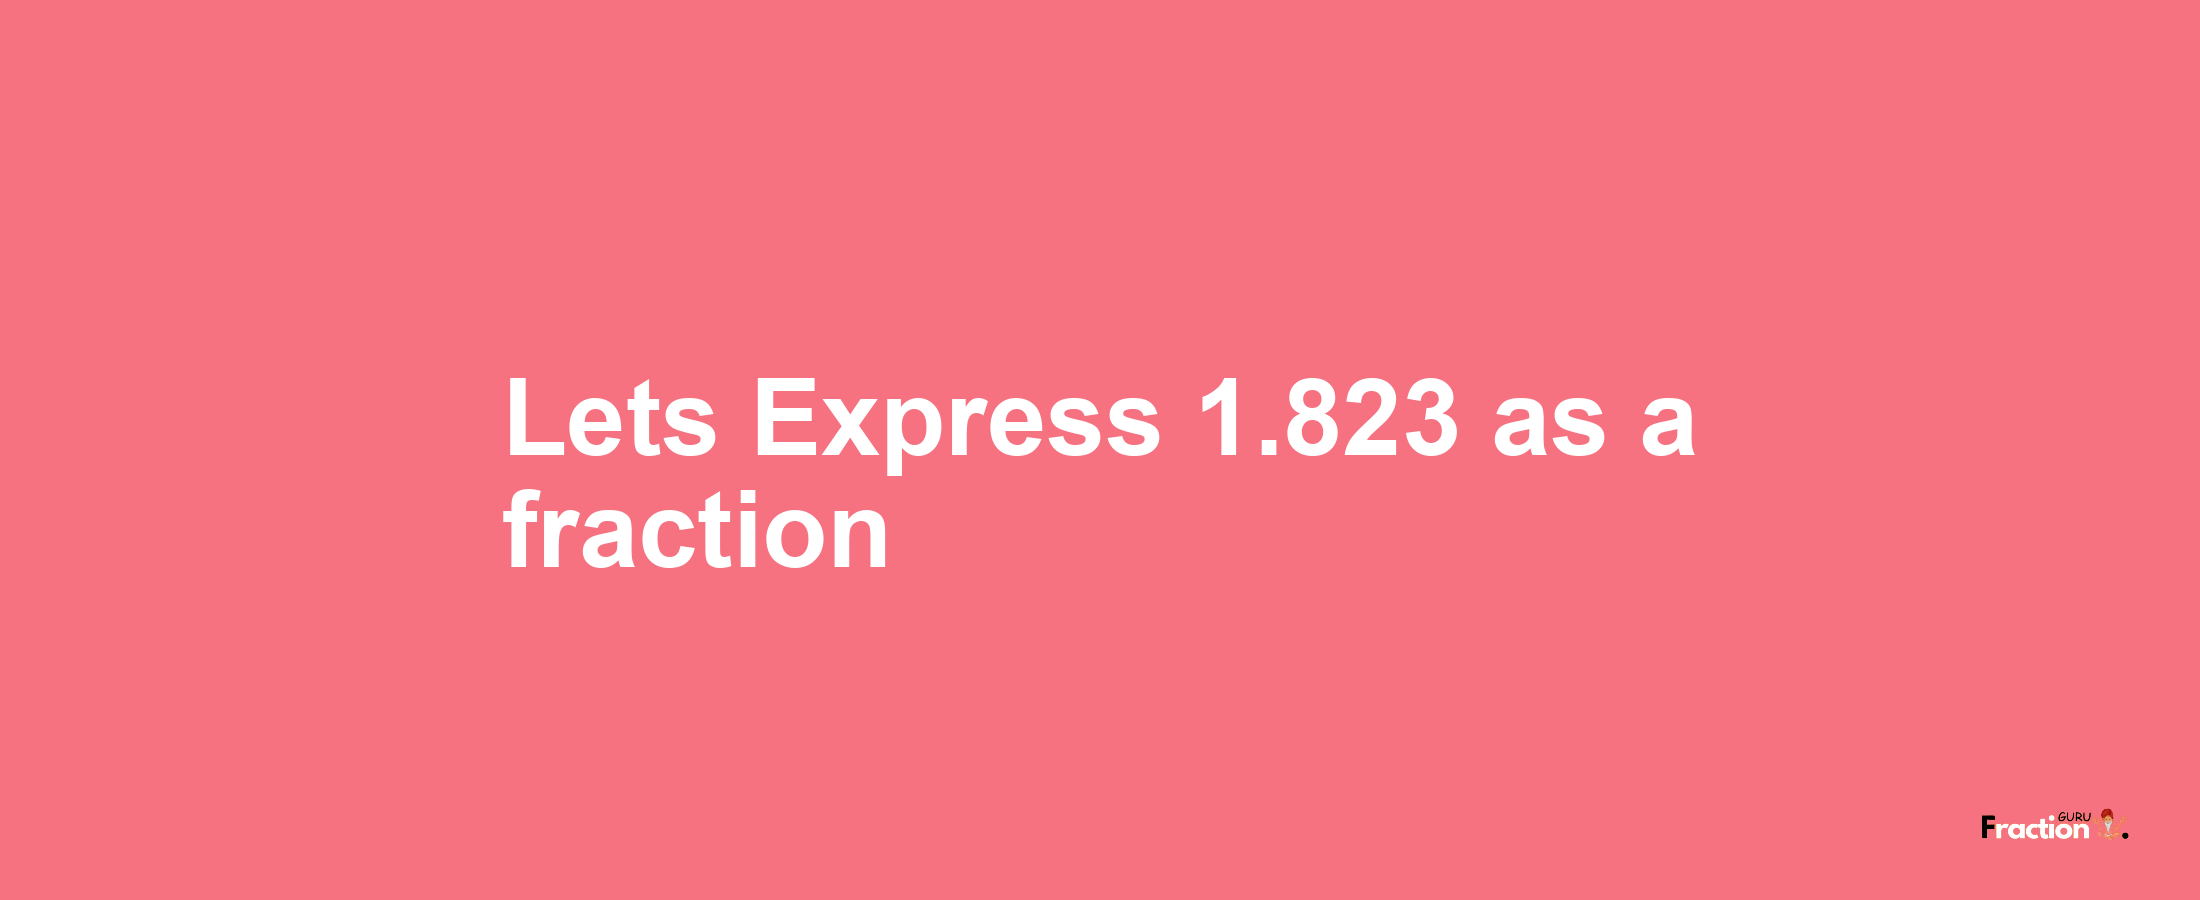 Lets Express 1.823 as afraction